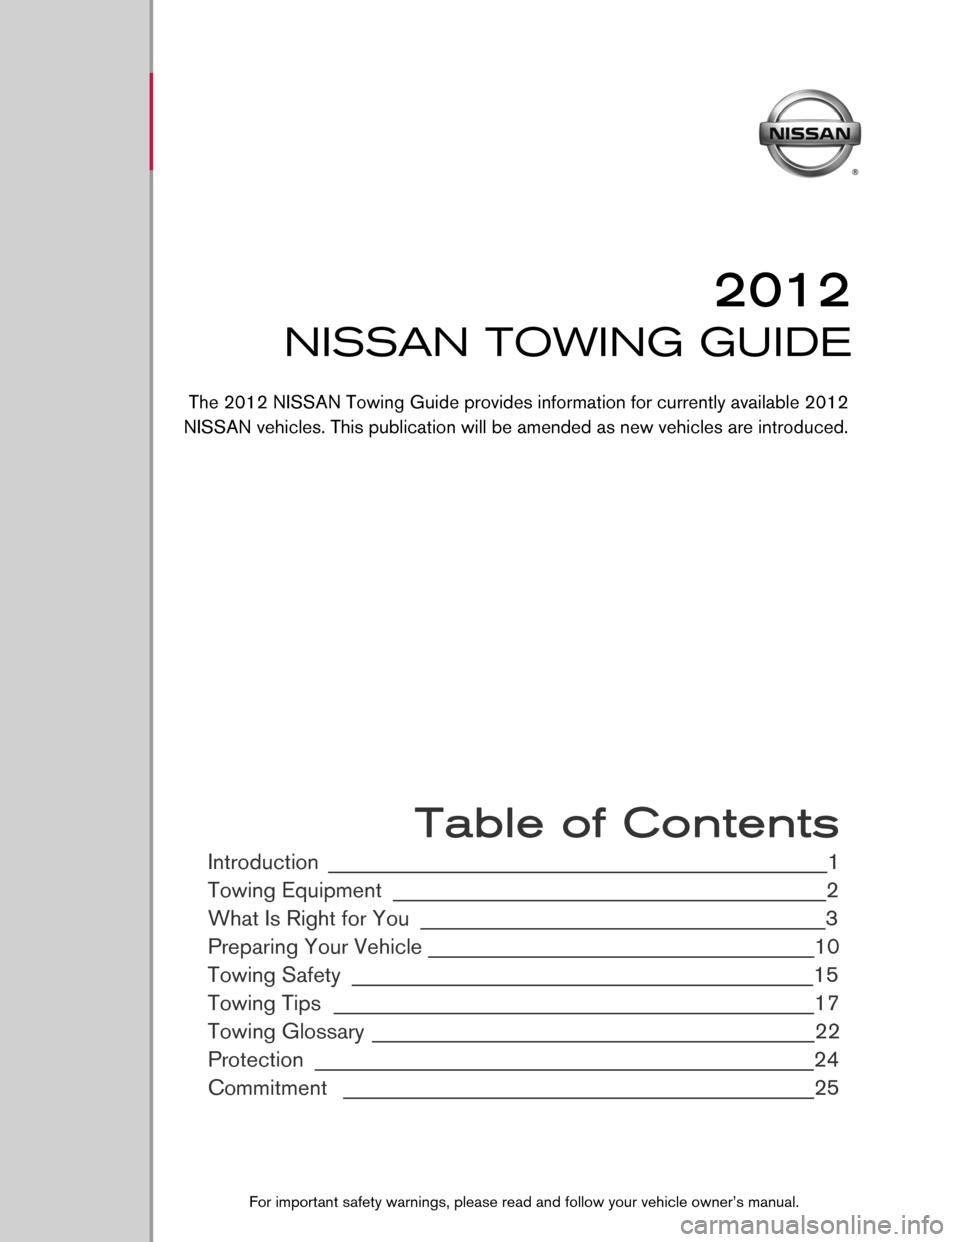 NISSAN 370Z ROADSTER 2012 Z34 Towing Guide 9
2012
NISSAN TOWING GUIDE
 Table of Contents
Introduction _____________________________________________________1 
Towing Equipment
 ______________________________________________2 
What Is Right for 